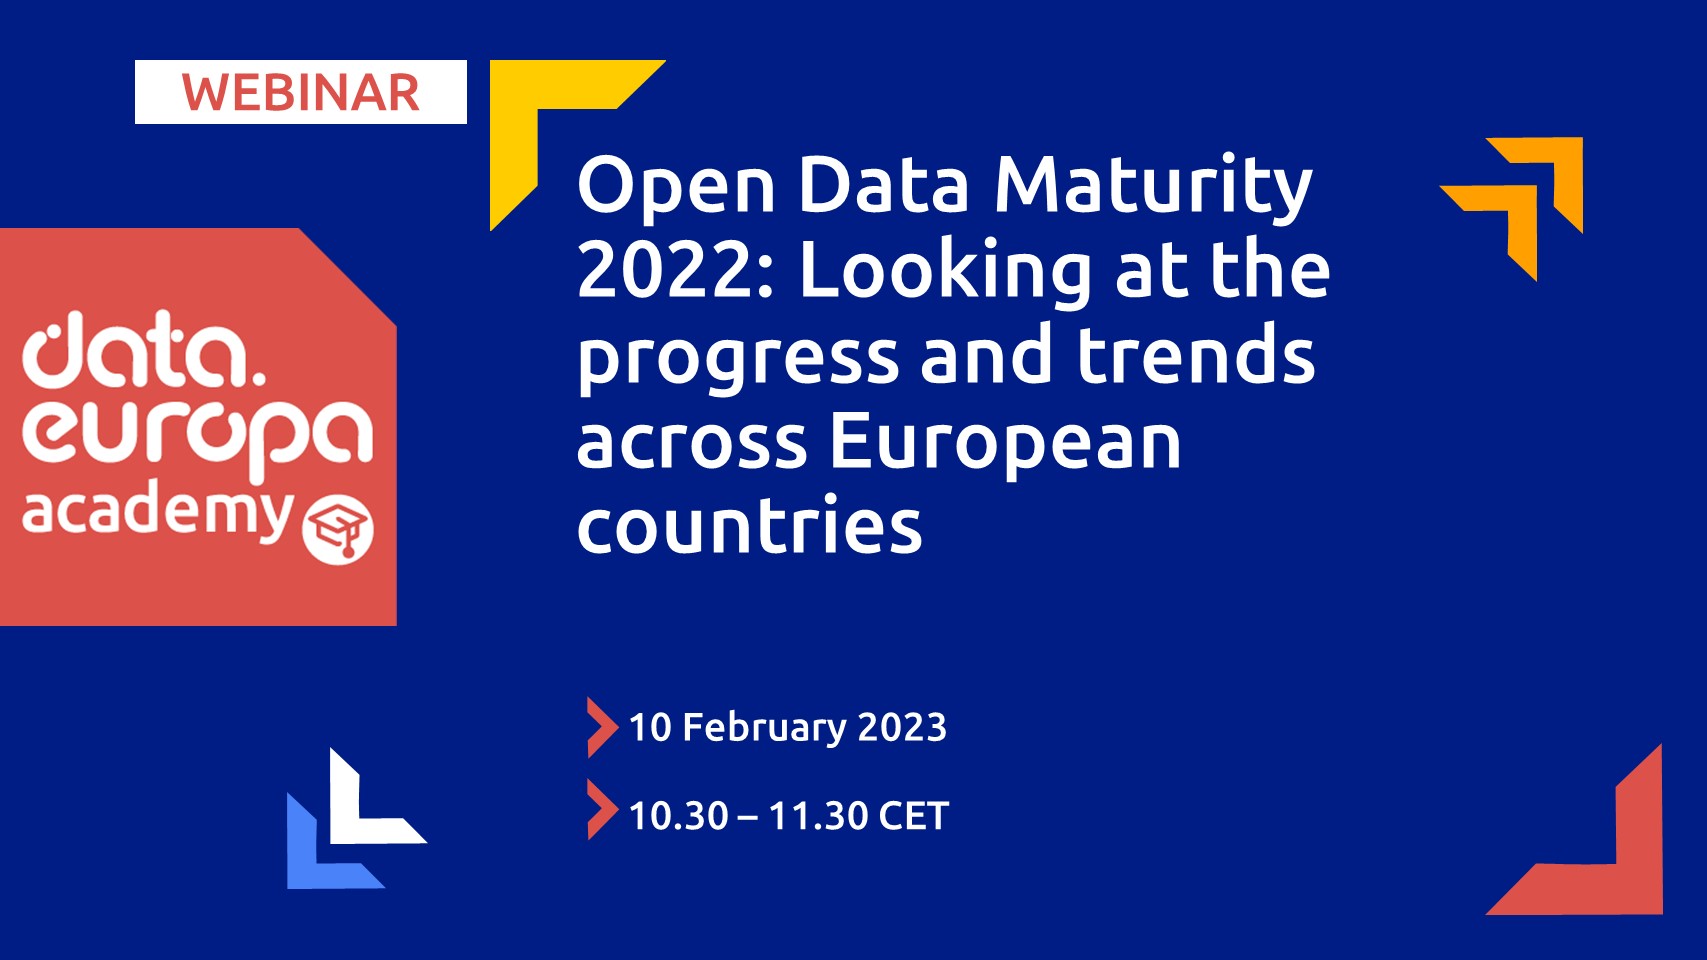 Open Data Maturity 2022: Looking at the progress and trends across European countries